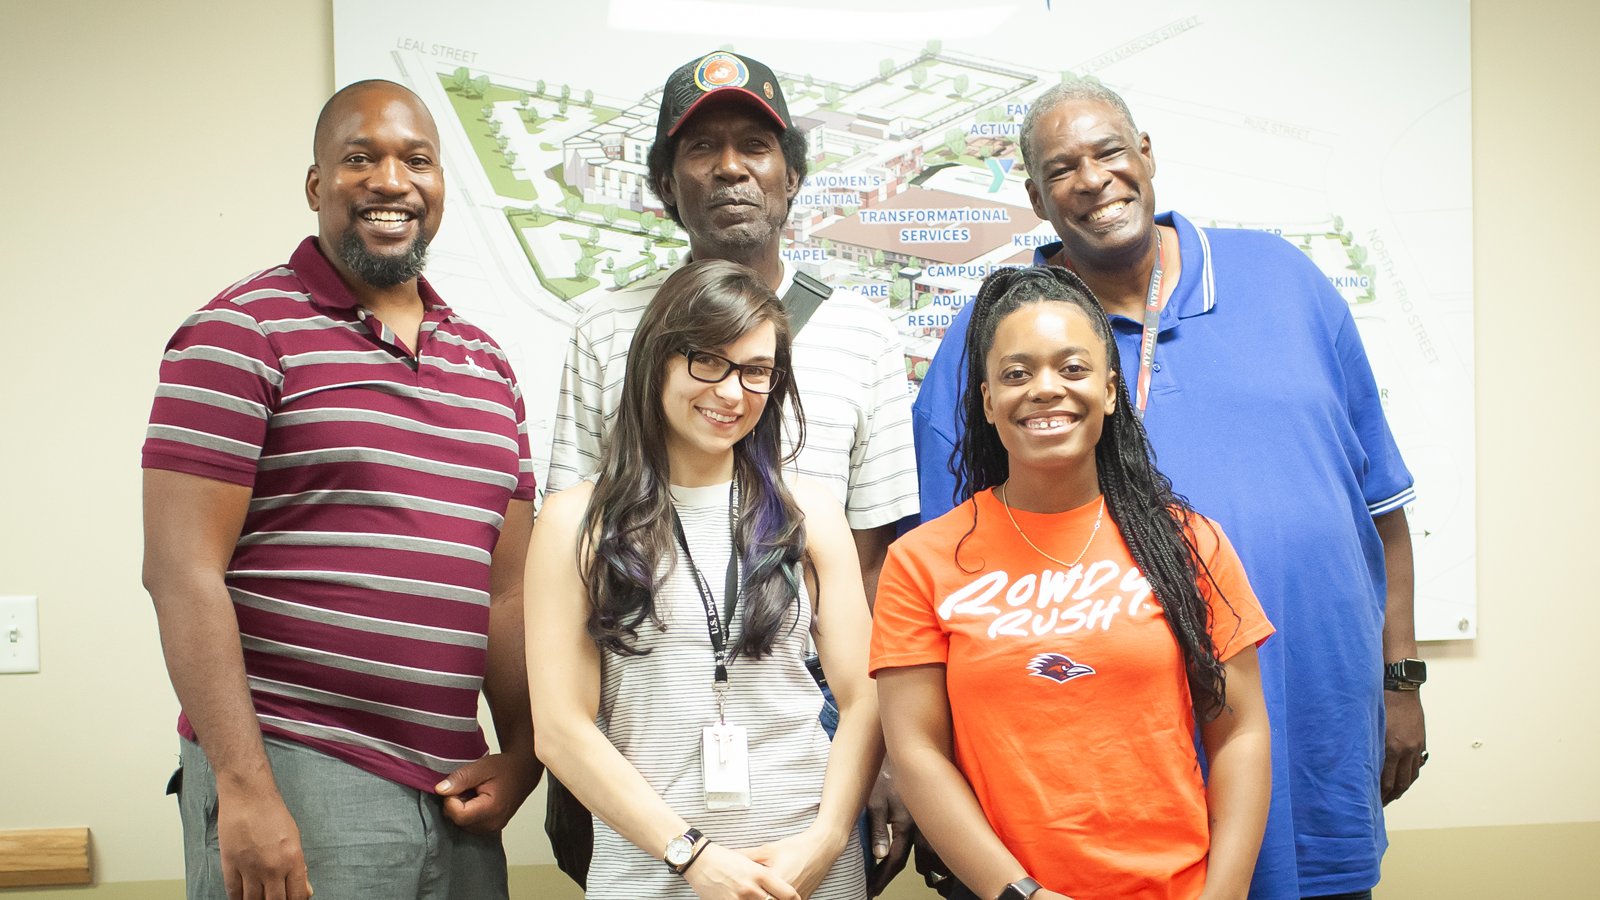 André Dixon, far right, poses with a group of formerly homeless veterans at the end of a money management training session with program manager and instructor, Katherine Kelton, front left.